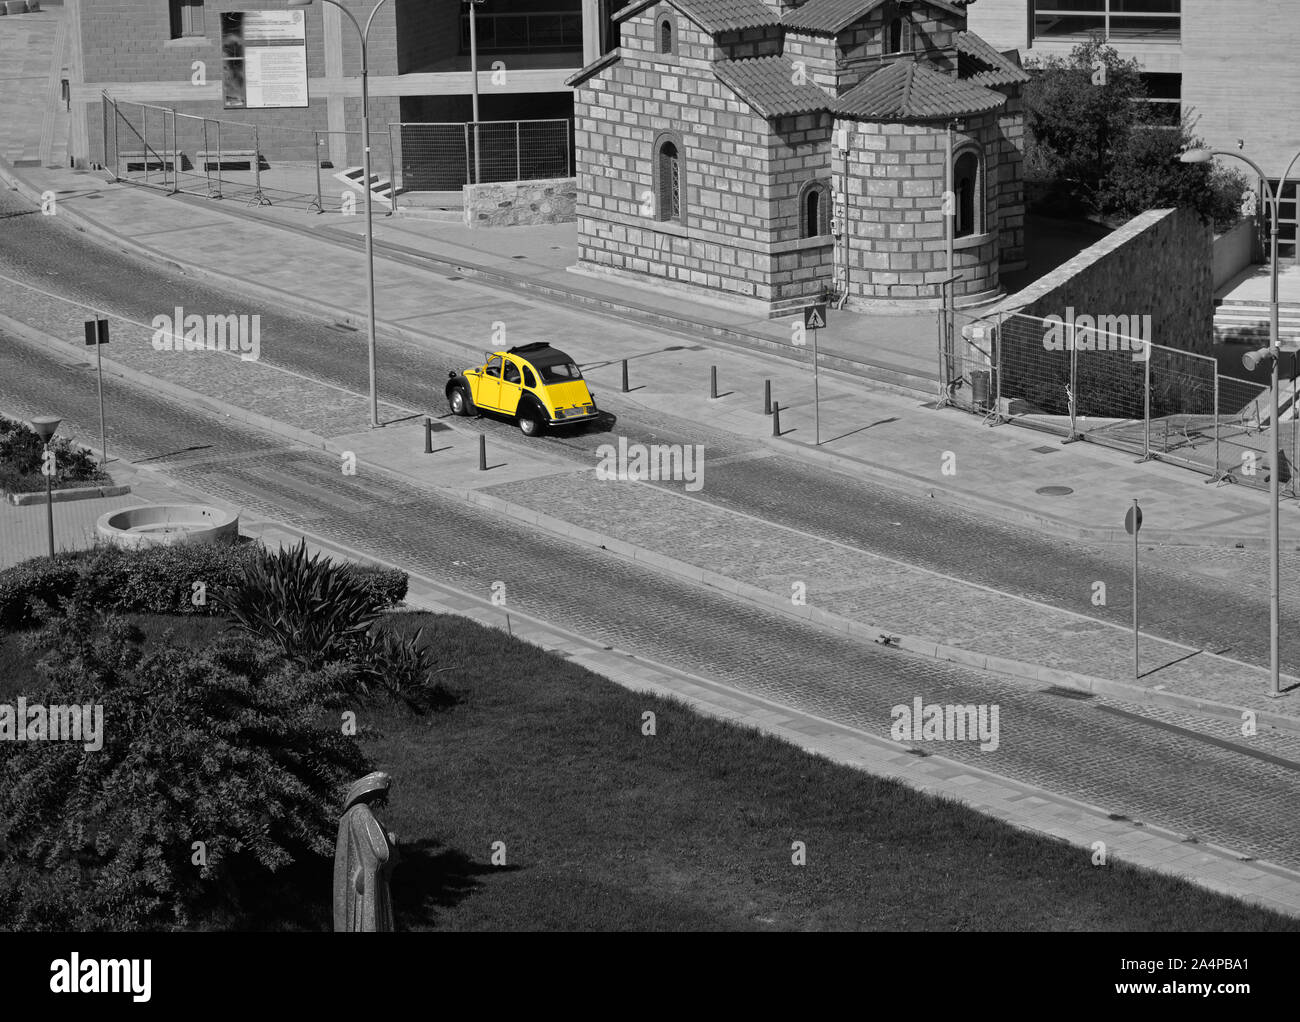 Yellow Citroen 2CV vintage car with a sunroof passing over a zebra crossing at Heraklion, Crete, Greece. Stock Photo